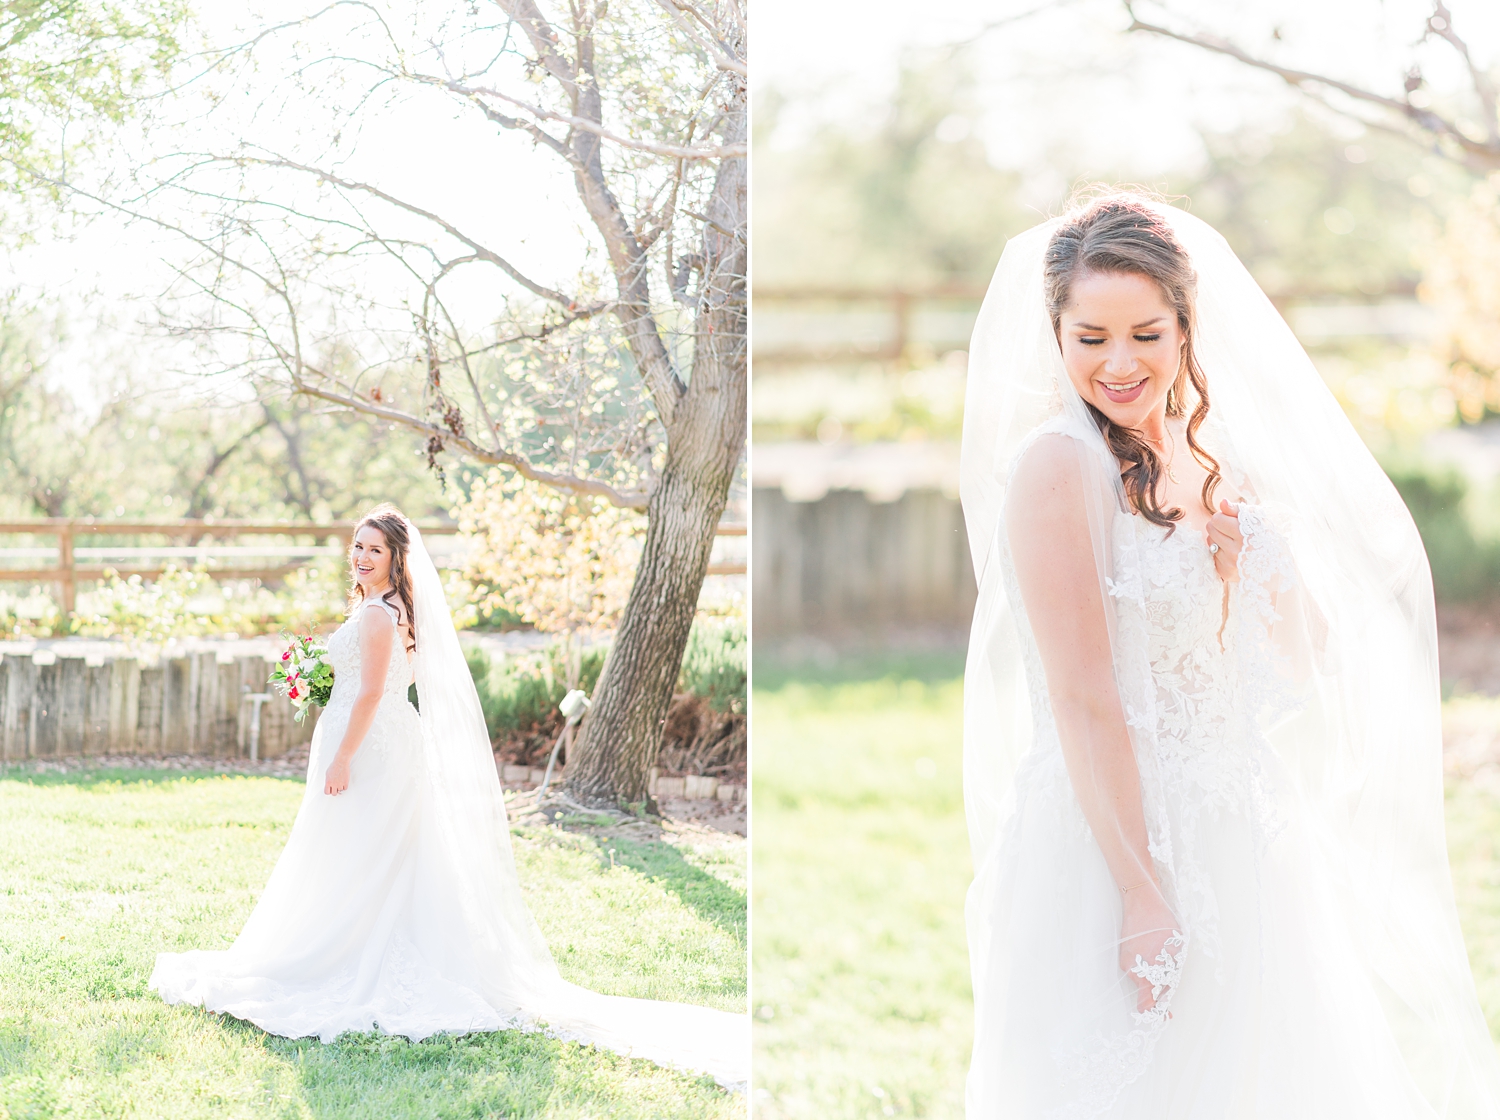 Bridal Session in a winery in temecula from a Temecula Wedding Photographer_0006.jpg